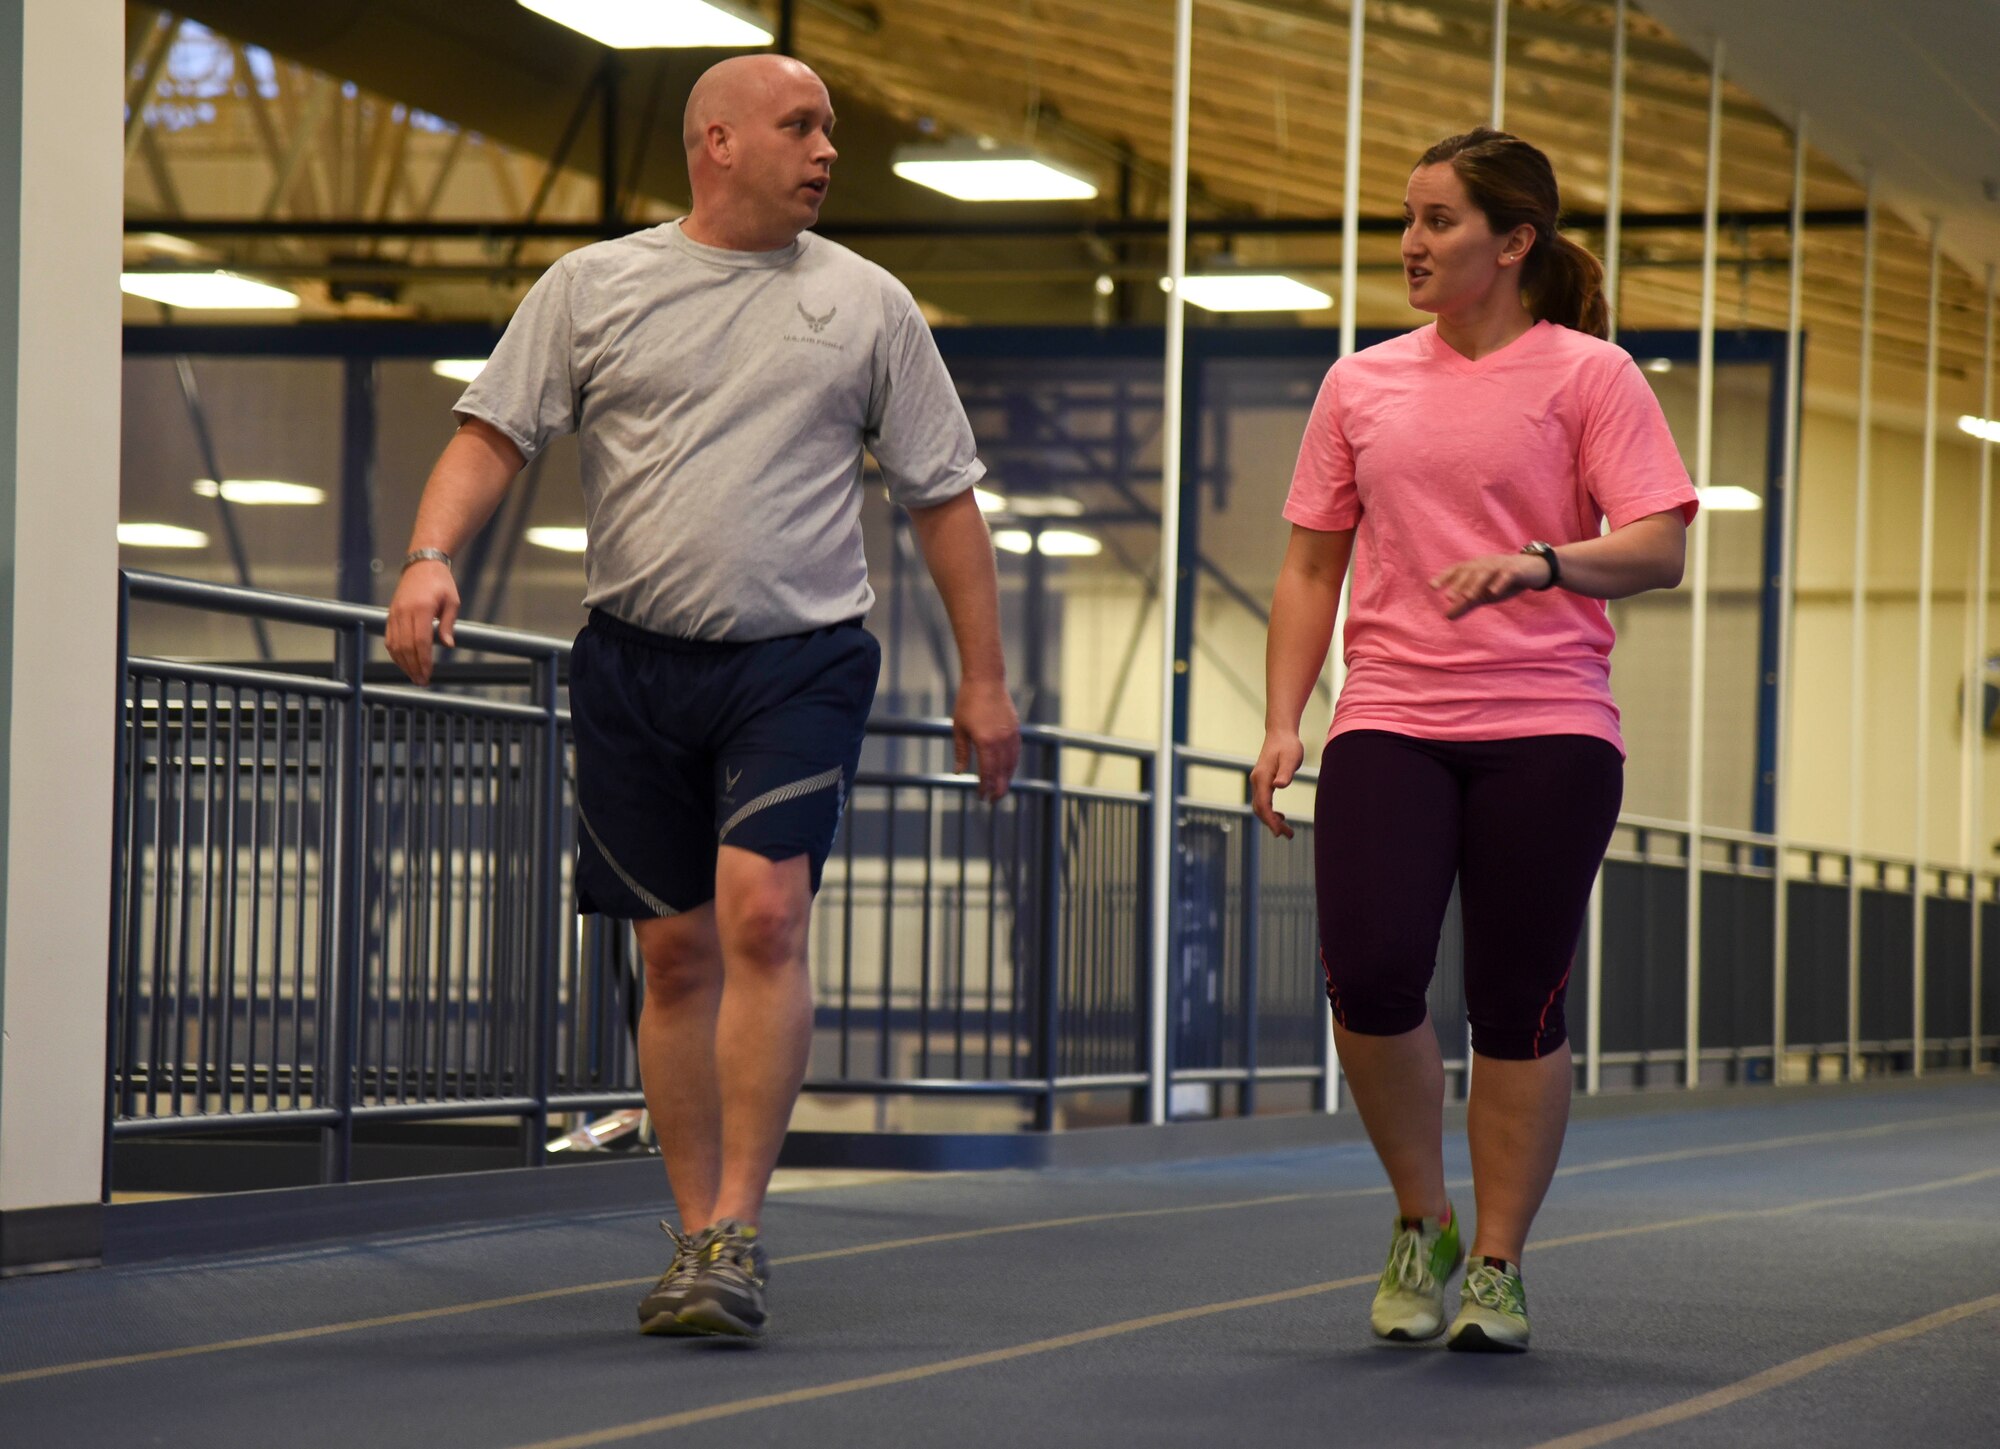 Airman 1st Class Kristina Kovch, 92nd Medical Operations Squadron aerospace medical technician, paces Master Sgt. Mike Lewandowski, 92nd MDOS medical information systems flight chief, during the run clinic program. Kovch was one of NBC's American Ninja Warrior competitors and is now helping Airmen improve on their physical fitness test. (U.S. Air Force photo/ Senior Airman Janelle Patiño)